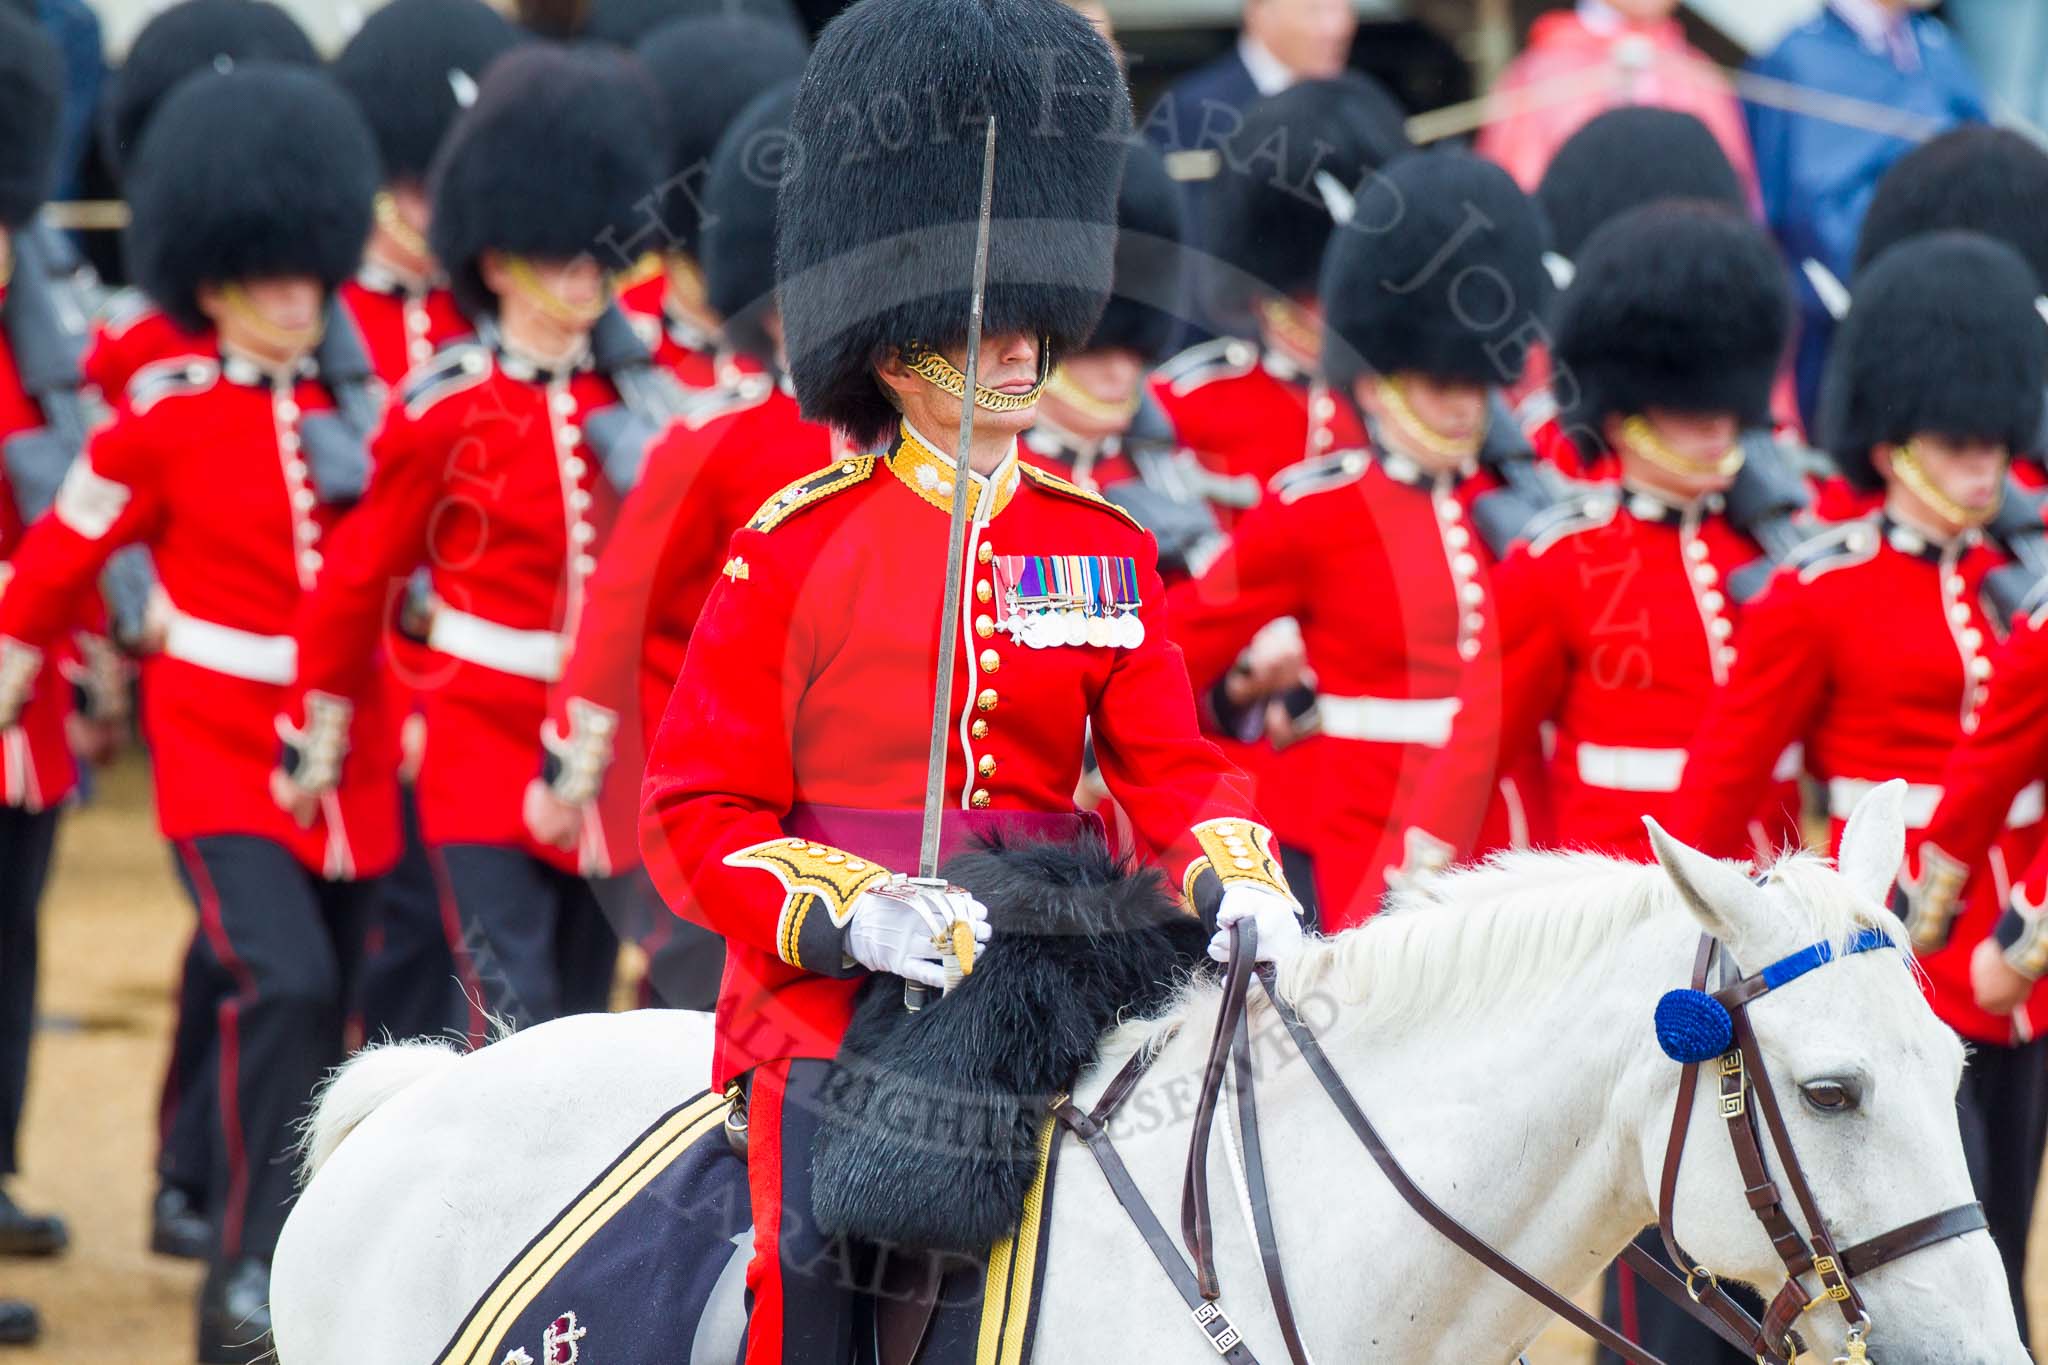 The Colonel's Review 2014.
Horse Guards Parade, Westminster,
London,

United Kingdom,
on 07 June 2014 at 11:43, image #541